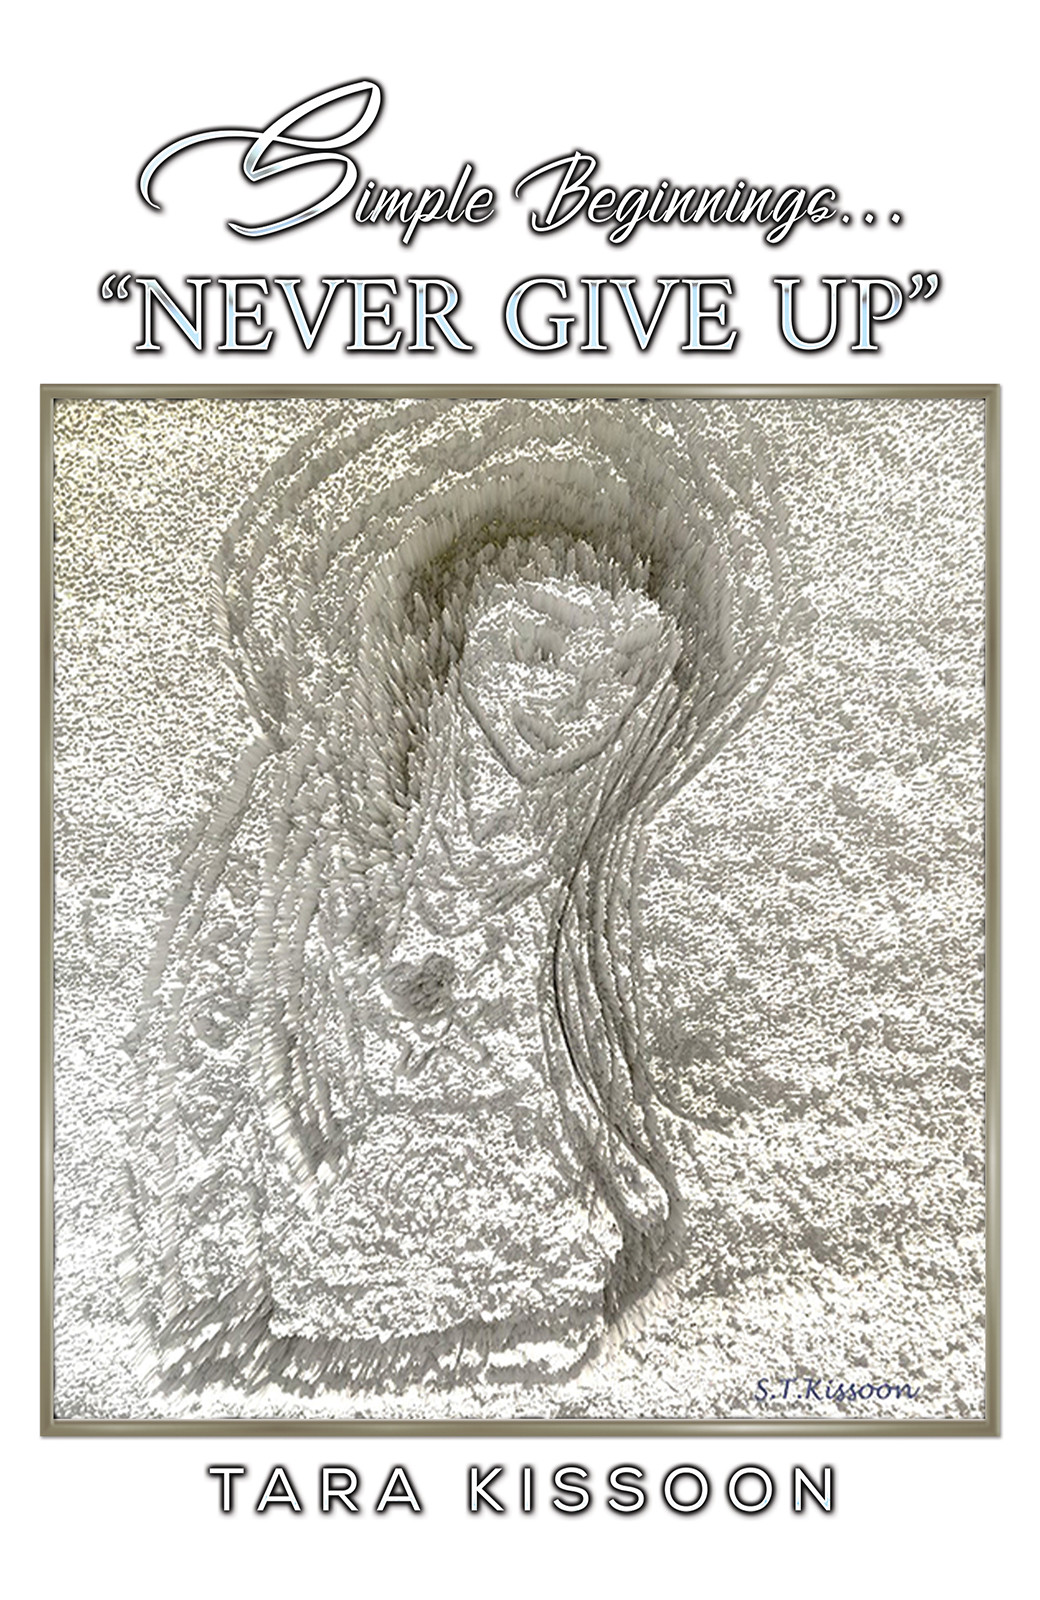 Simple Beginnings... "Never Give Up"